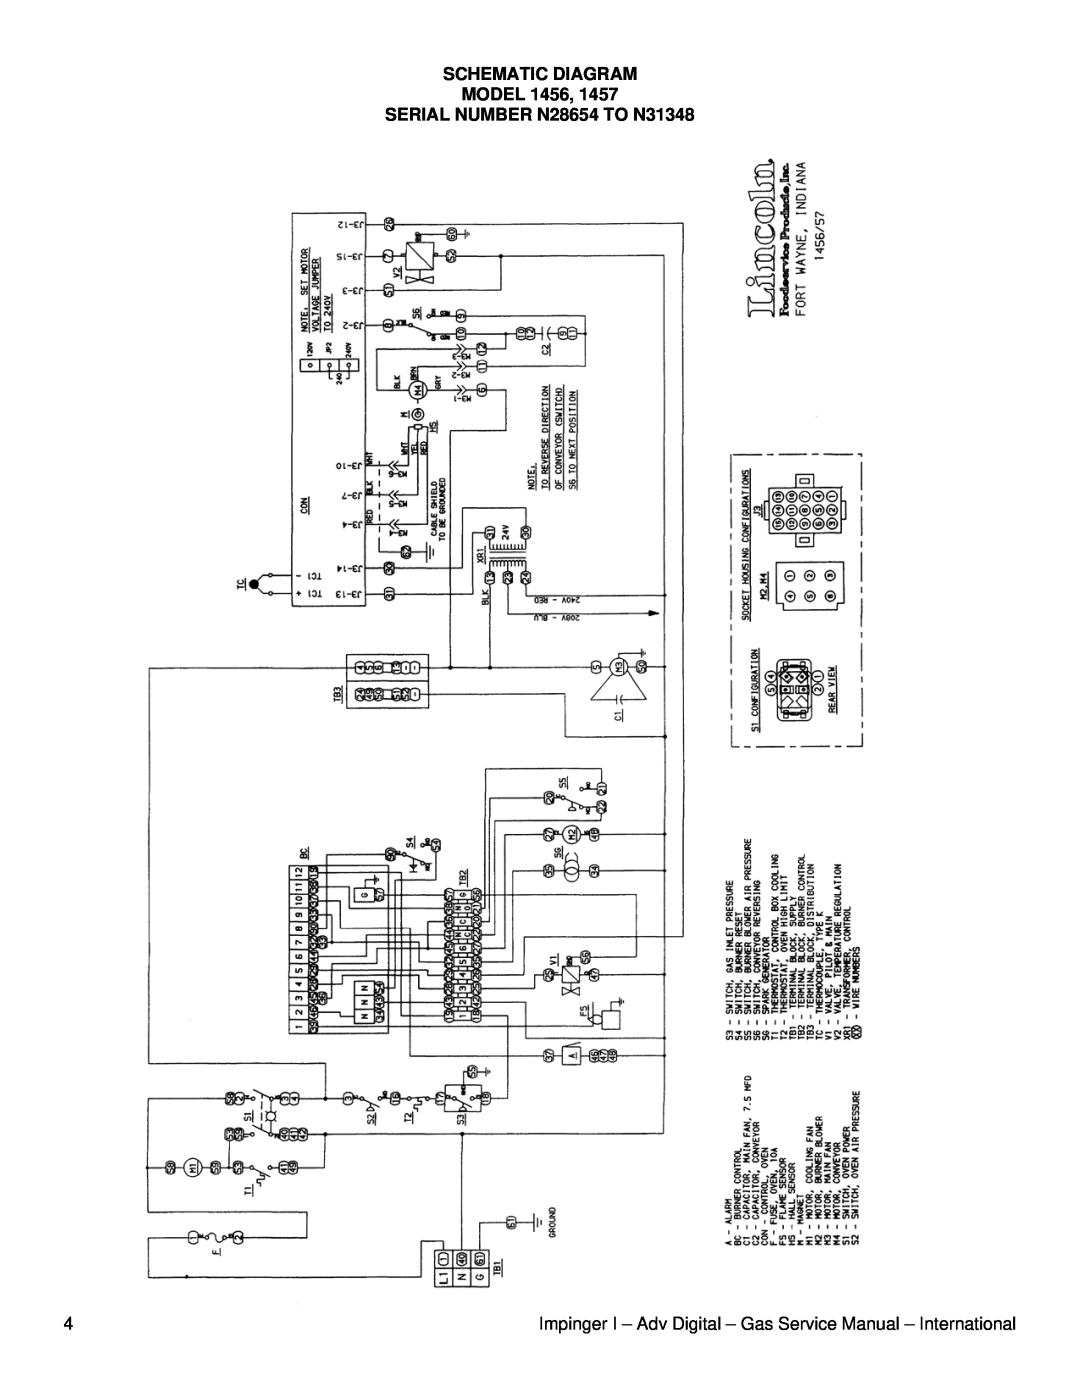 Lincoln 1457, 1434-000-E, 1433-000-E, 1456 service manual Schematic Diagram Model, SERIAL NUMBER N28654 TO N31348 